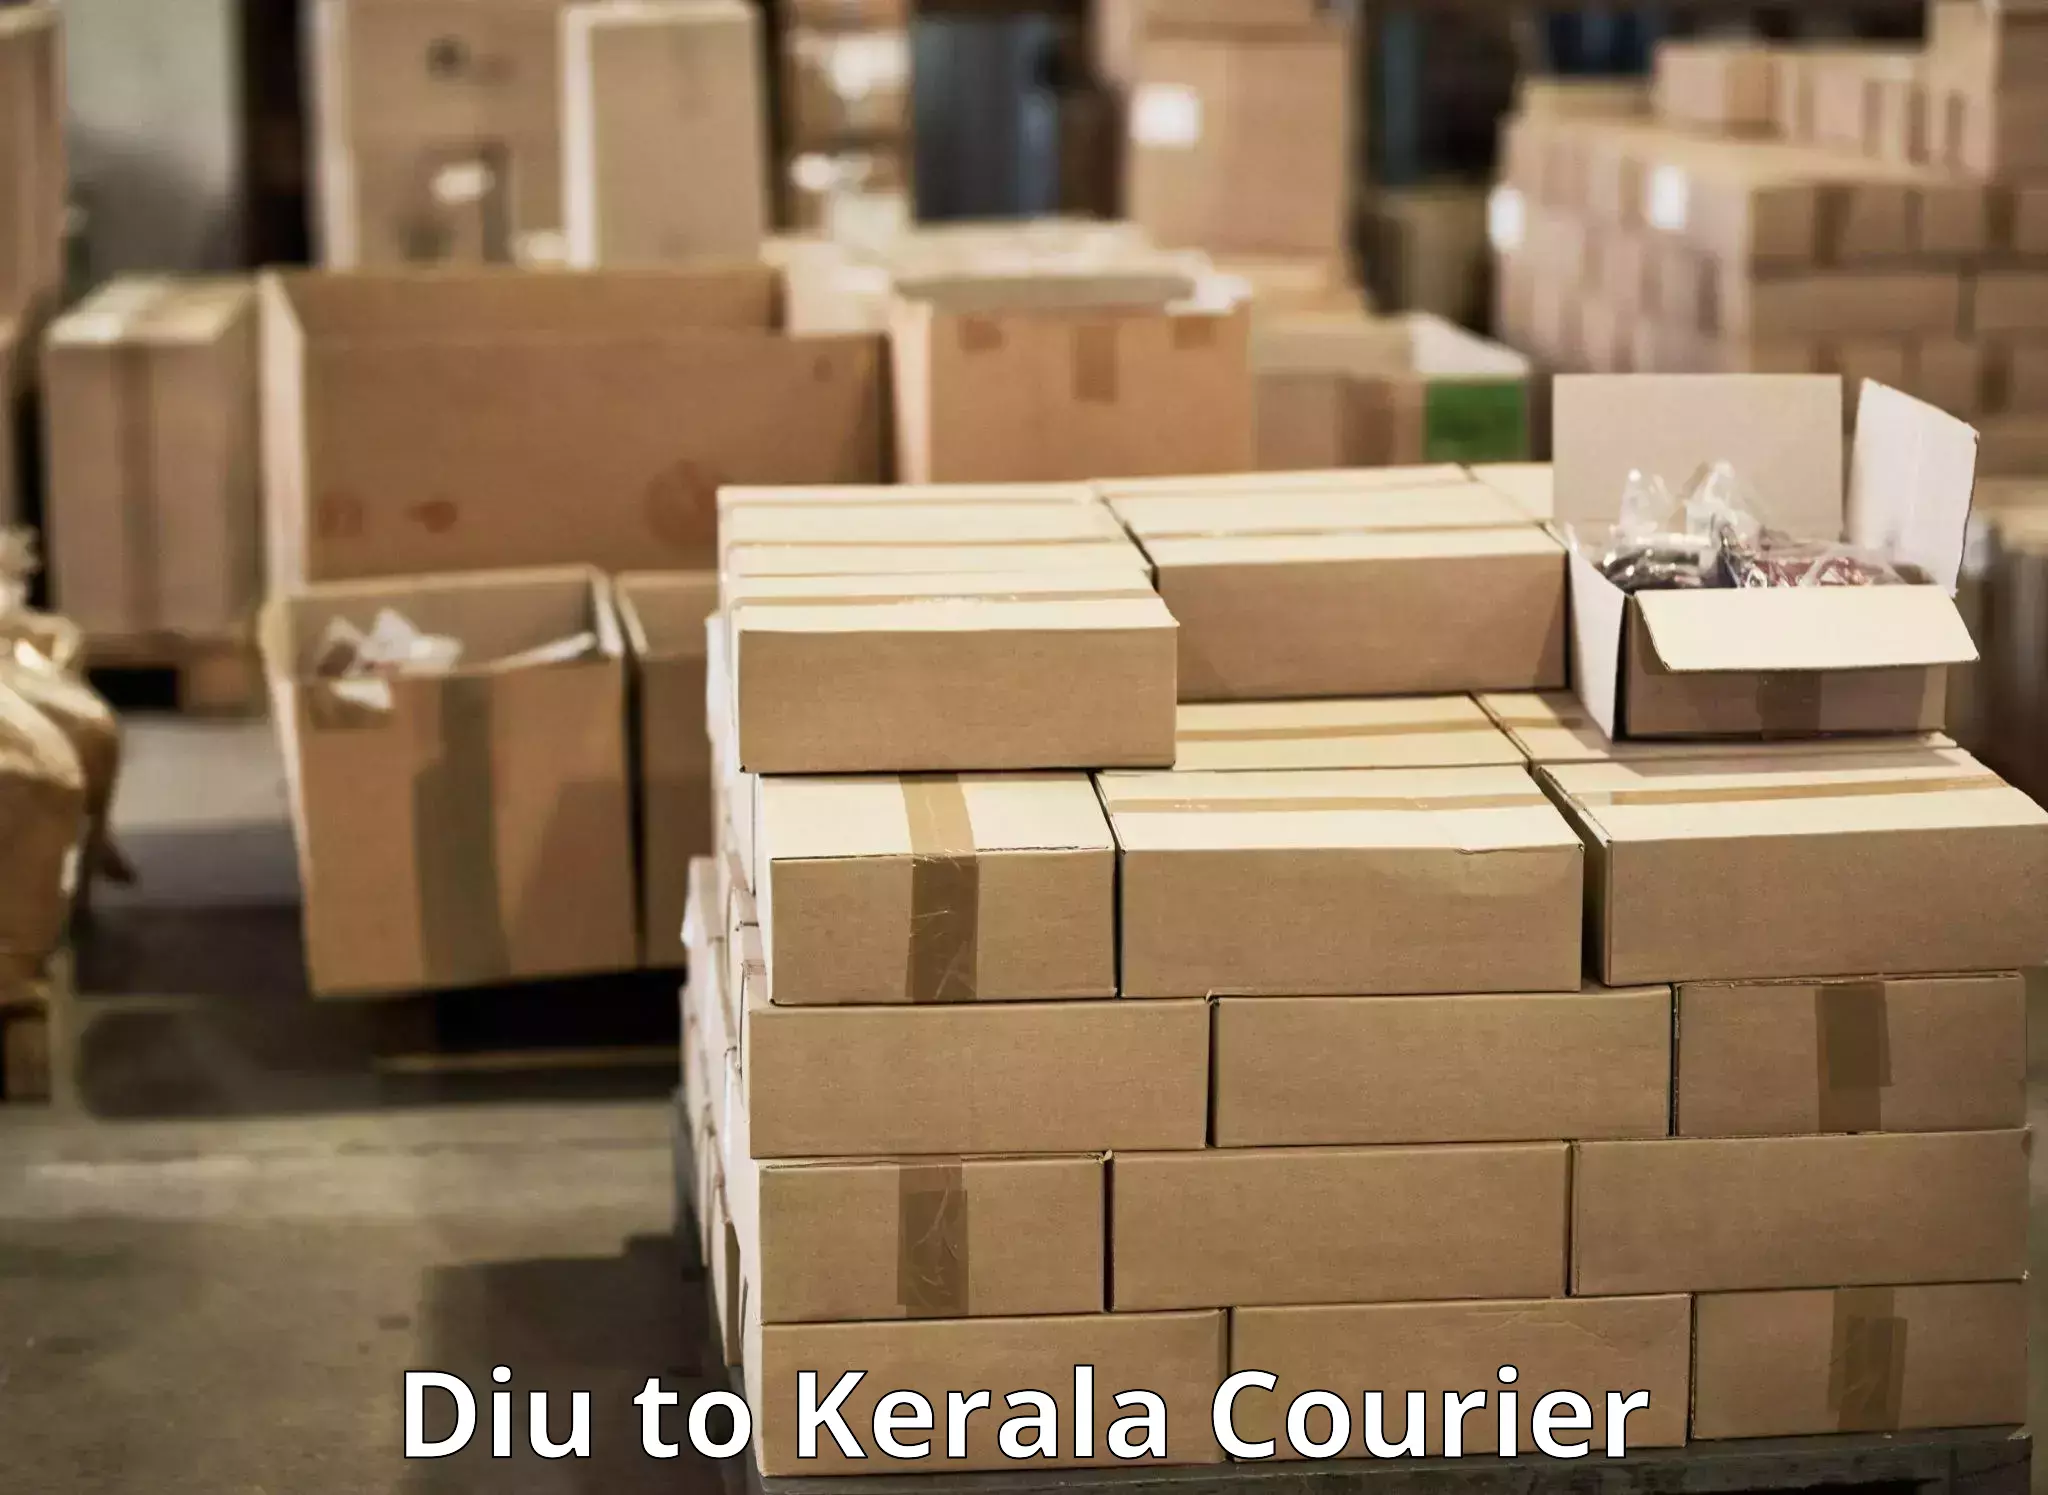 Nationwide parcel services Diu to Kerala